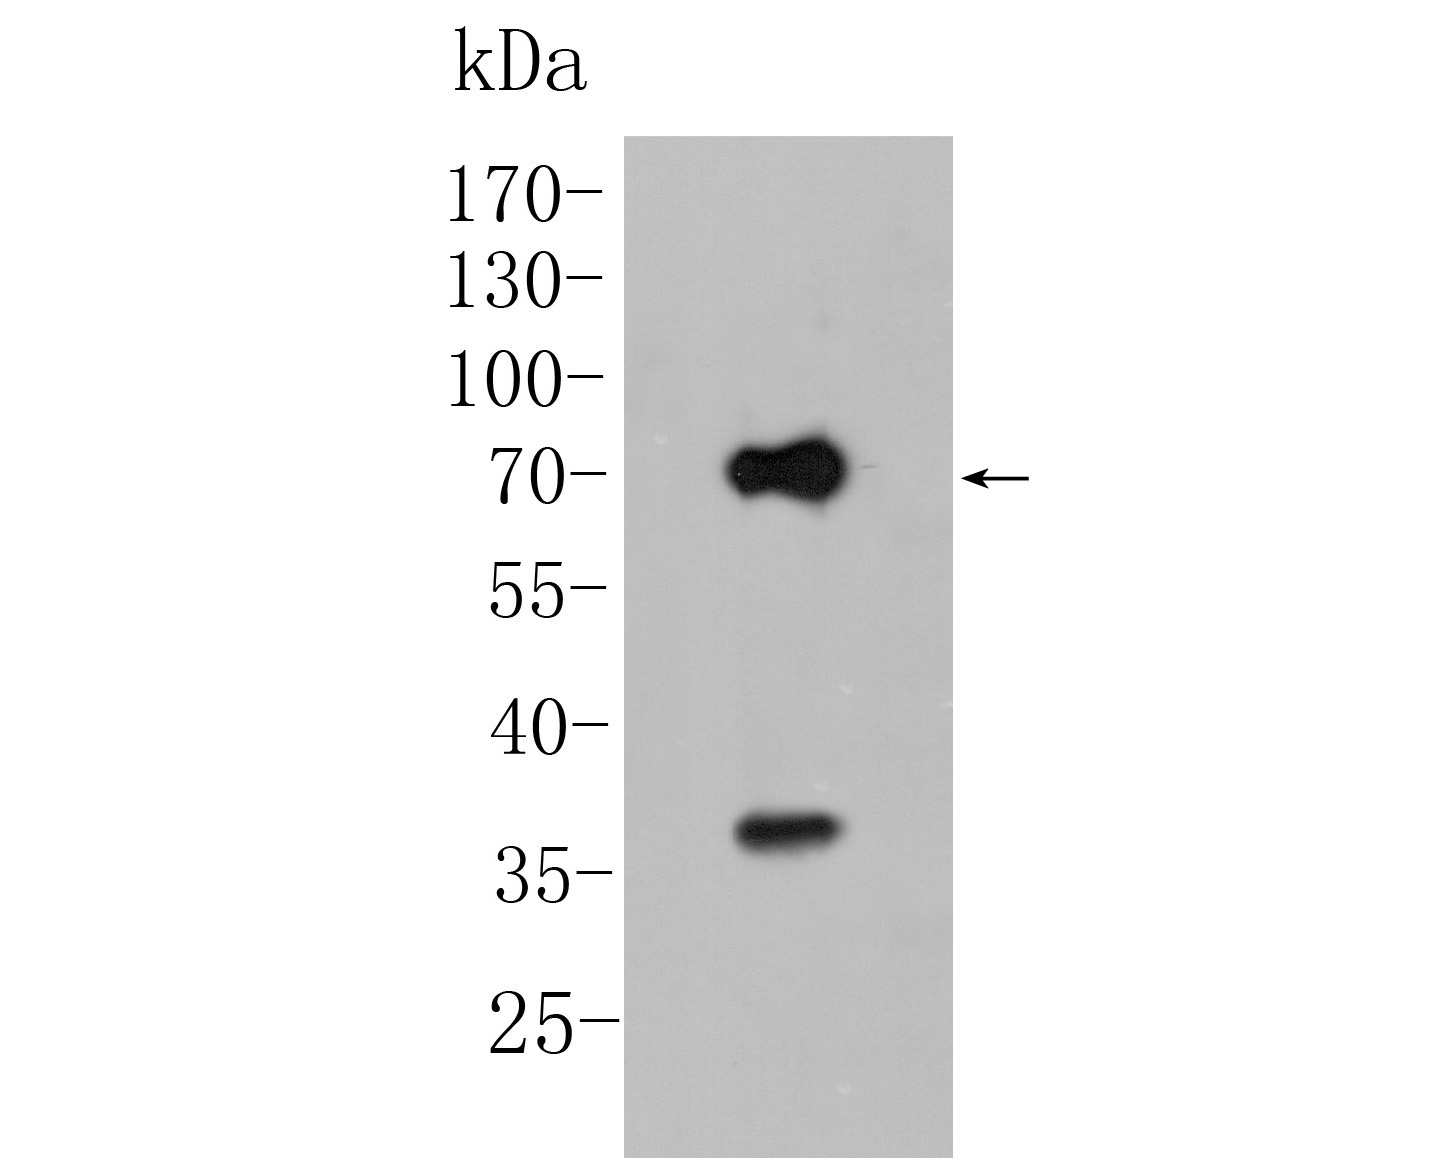 Fig1:; Western blot analysis of KCNN2 on rat brain tissue lysate. Proteins were transferred to a PVDF membrane and blocked with 5% BSA in PBS for 1 hour at room temperature. The primary antibody ( 1/500) was used in 5% BSA at room temperature for 2 hours. Goat Anti-Rabbit IgG - HRP Secondary Antibody (HA1001) at 1:5,000 dilution was used for 1 hour at room temperature.